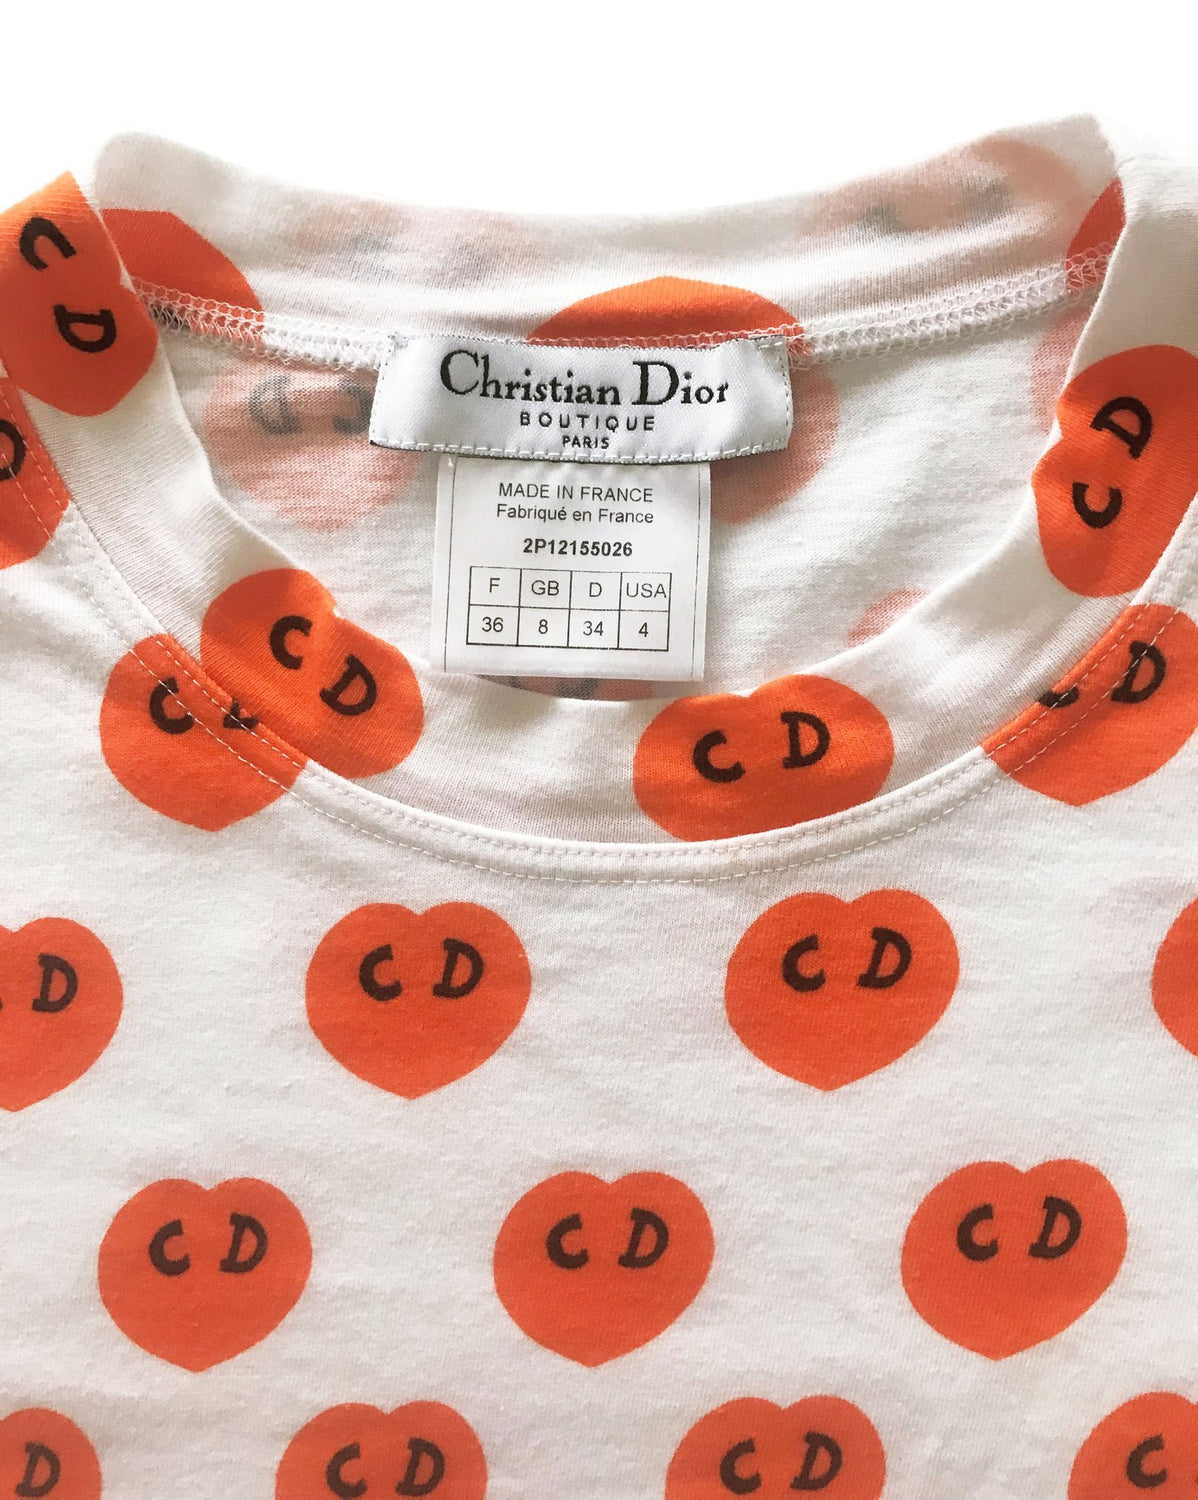 Fruit Vintage Christian Dior CD heart print Logo t-shirt by John Galliano. Features a classic t-shirt cut and graphic pattern logo monogram print.